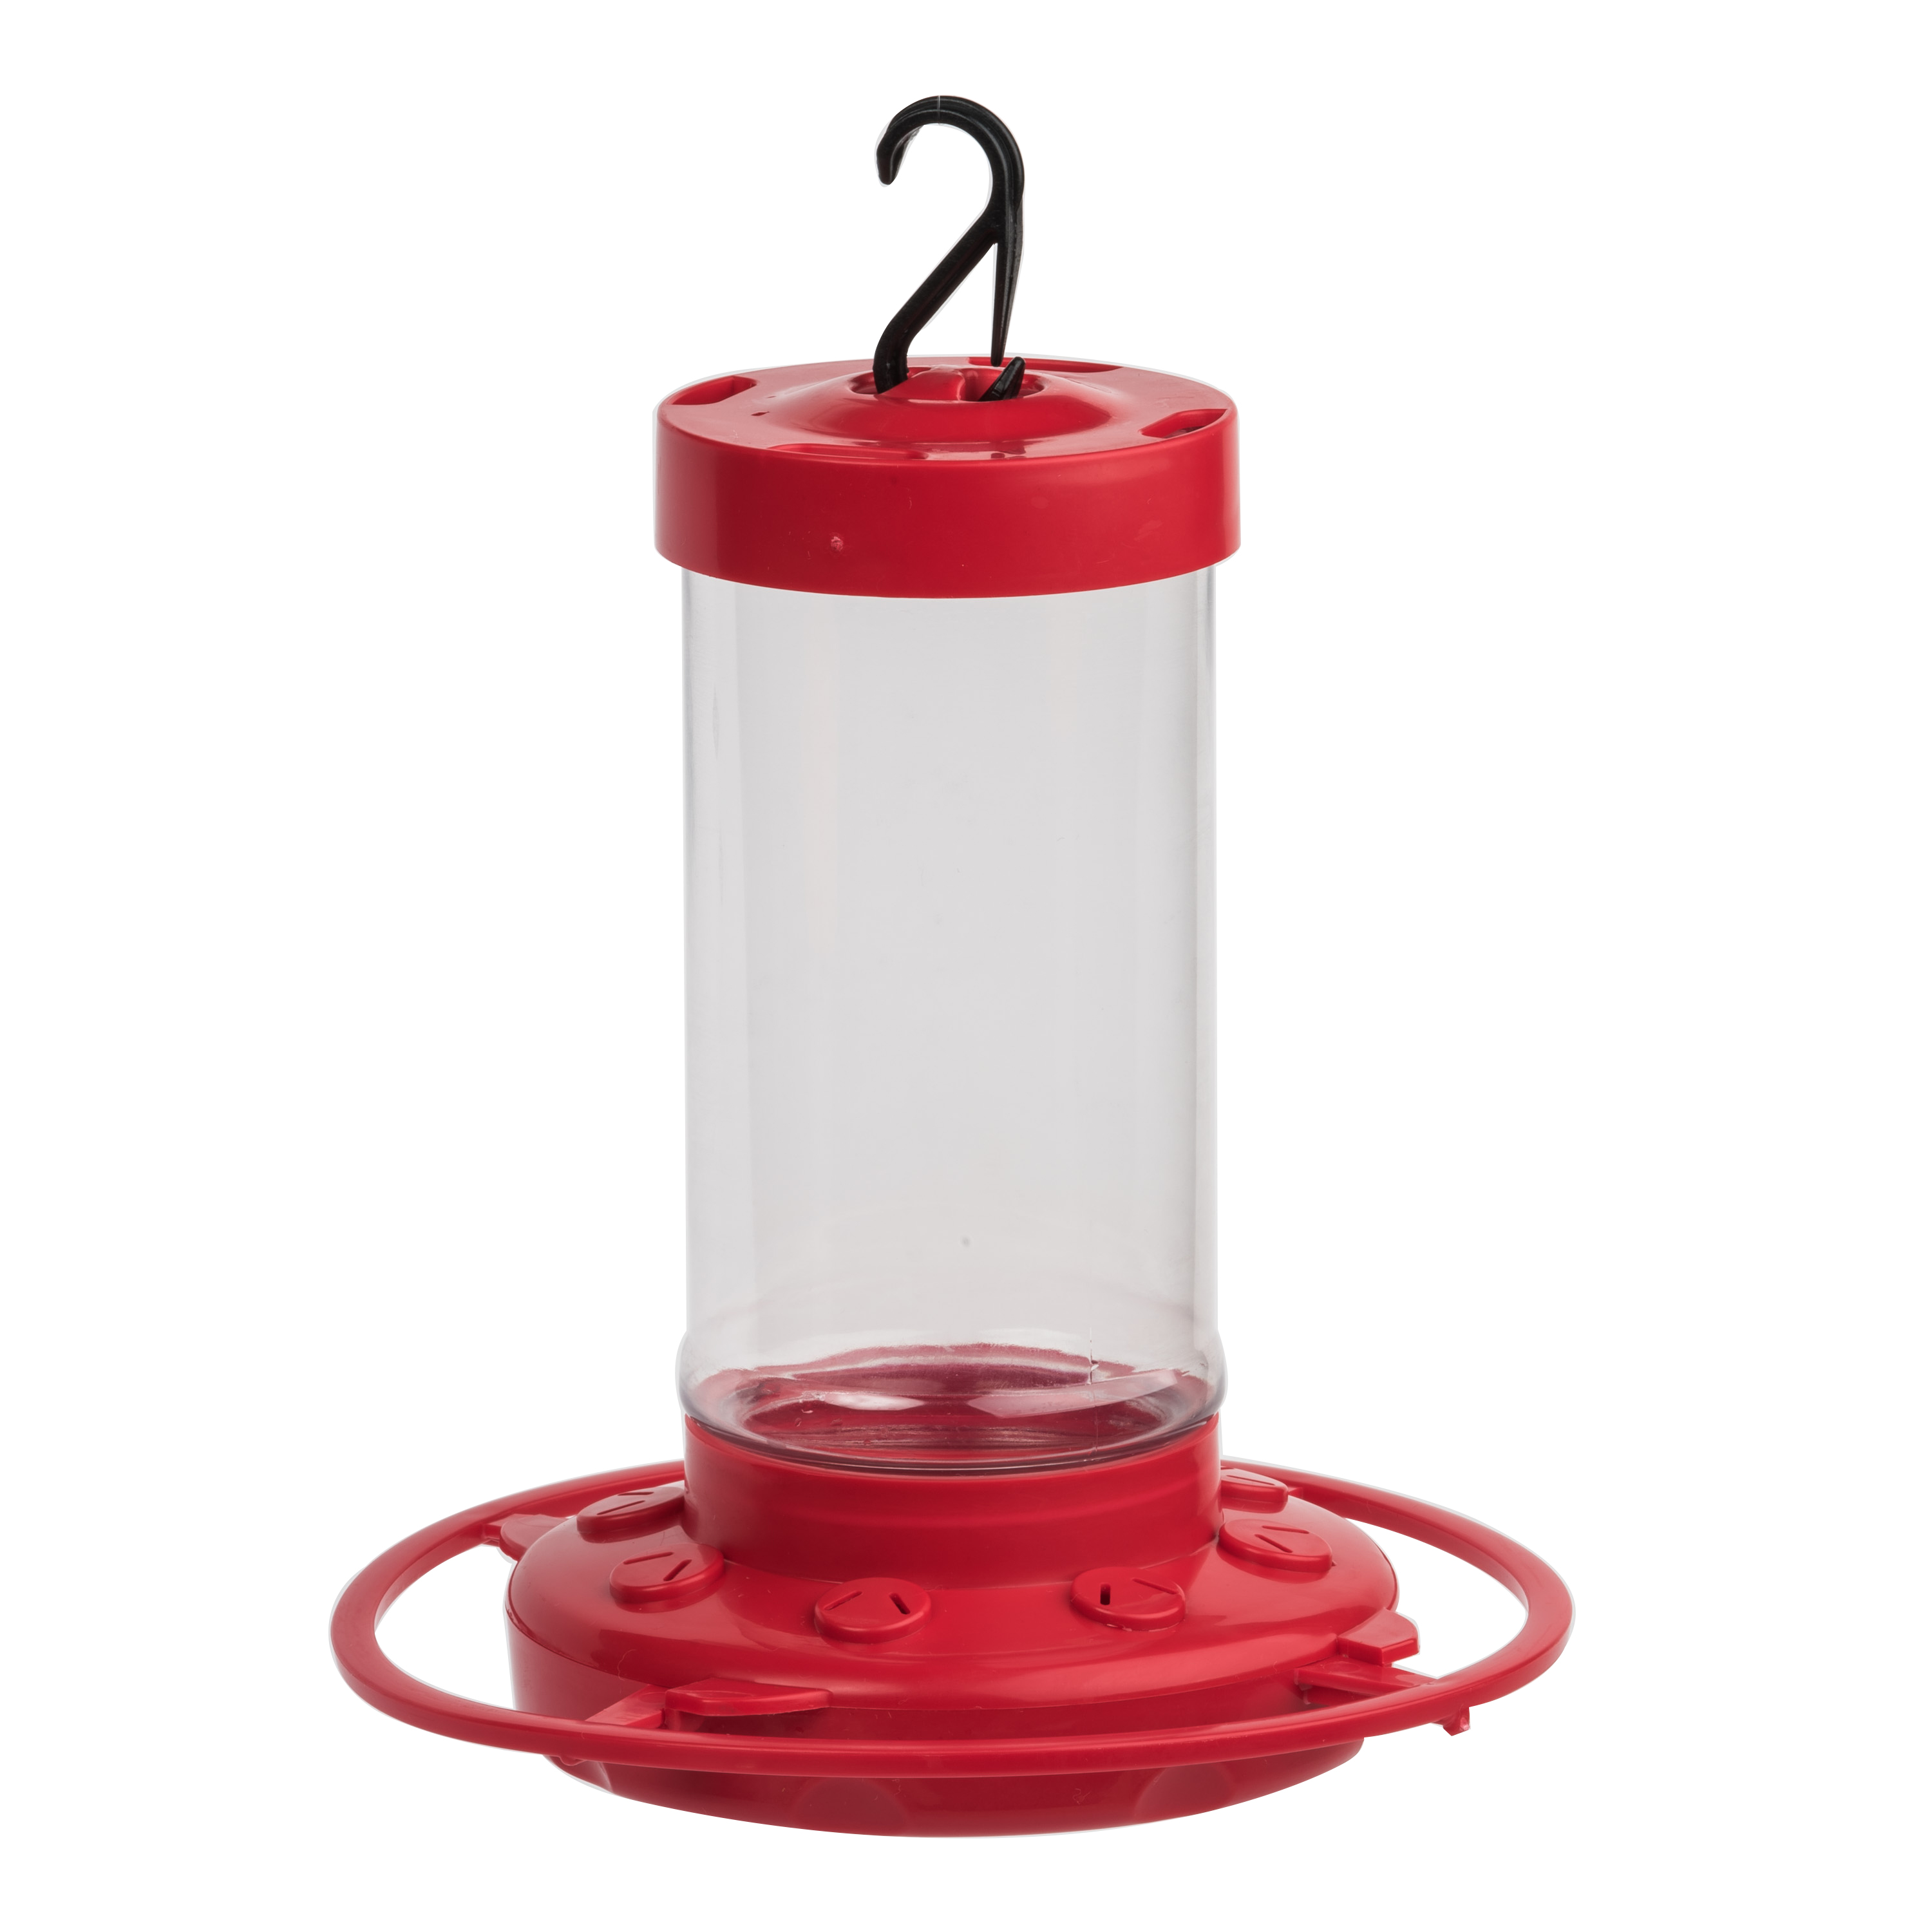 First Nature Hummingbird Feeder, 16 oz, Red, Plastic - image 5 of 13